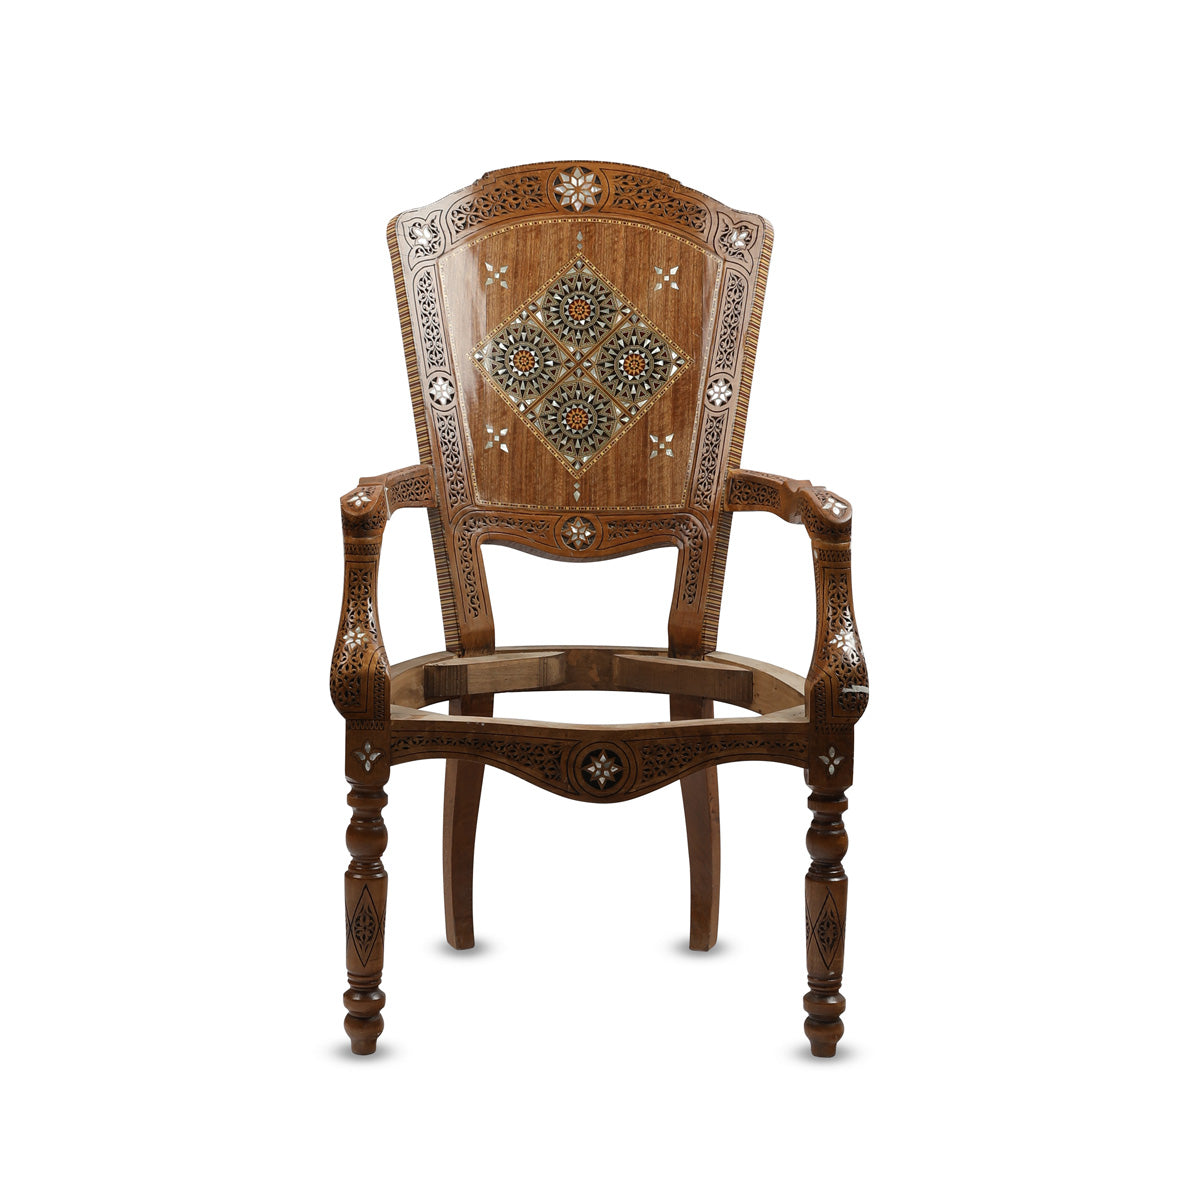 Front View of Mother of Pearl Inlaid Mosaic Wood Chair